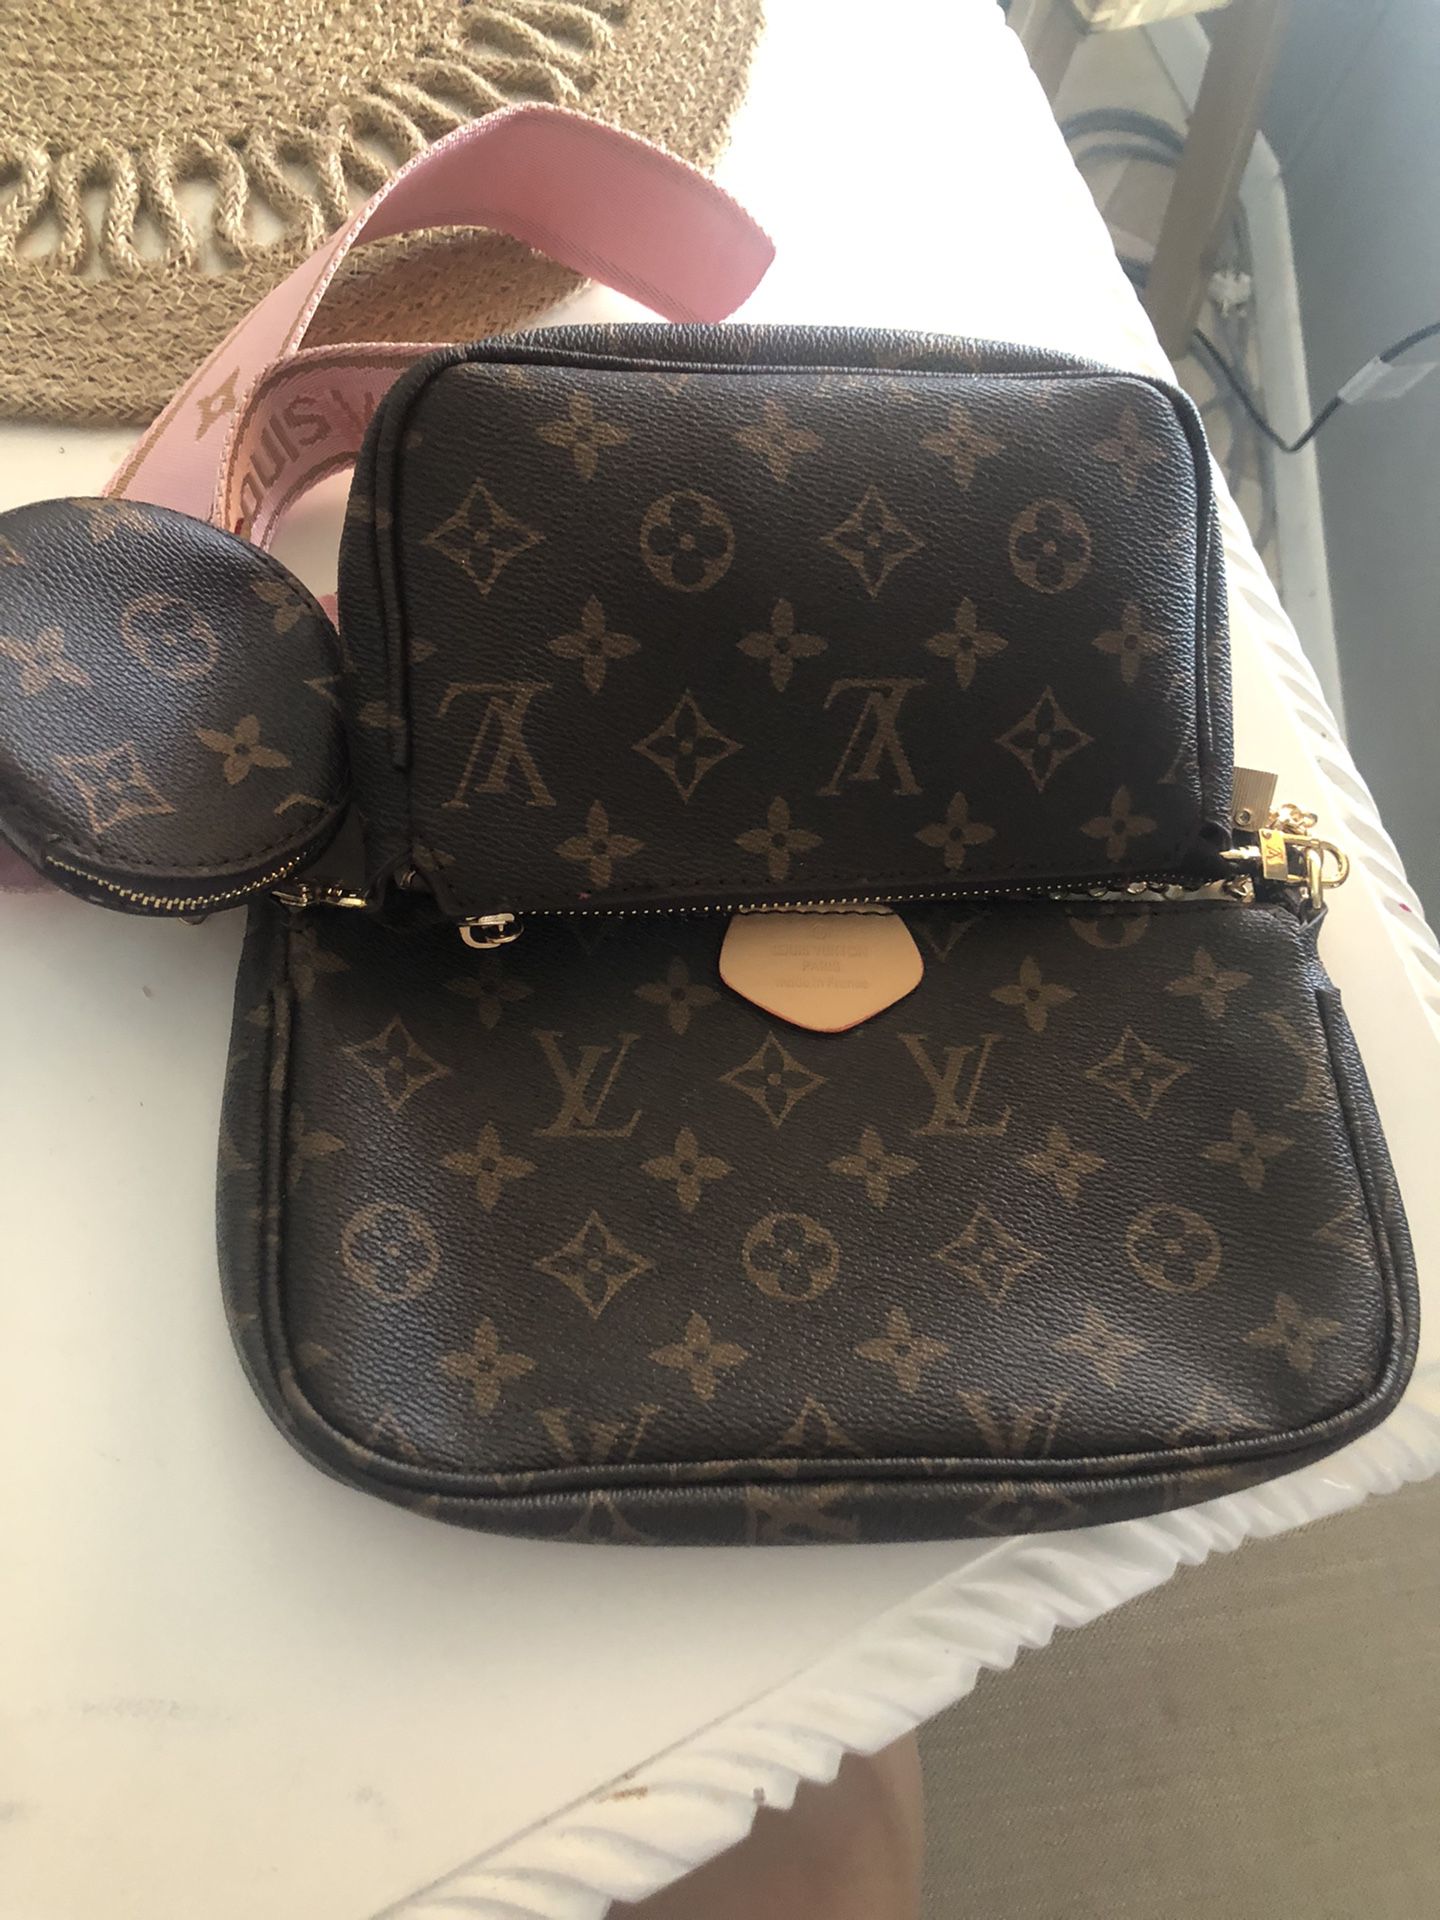 Louis Vuitton purse for sale $480 for Sale in Salem, OR - OfferUp